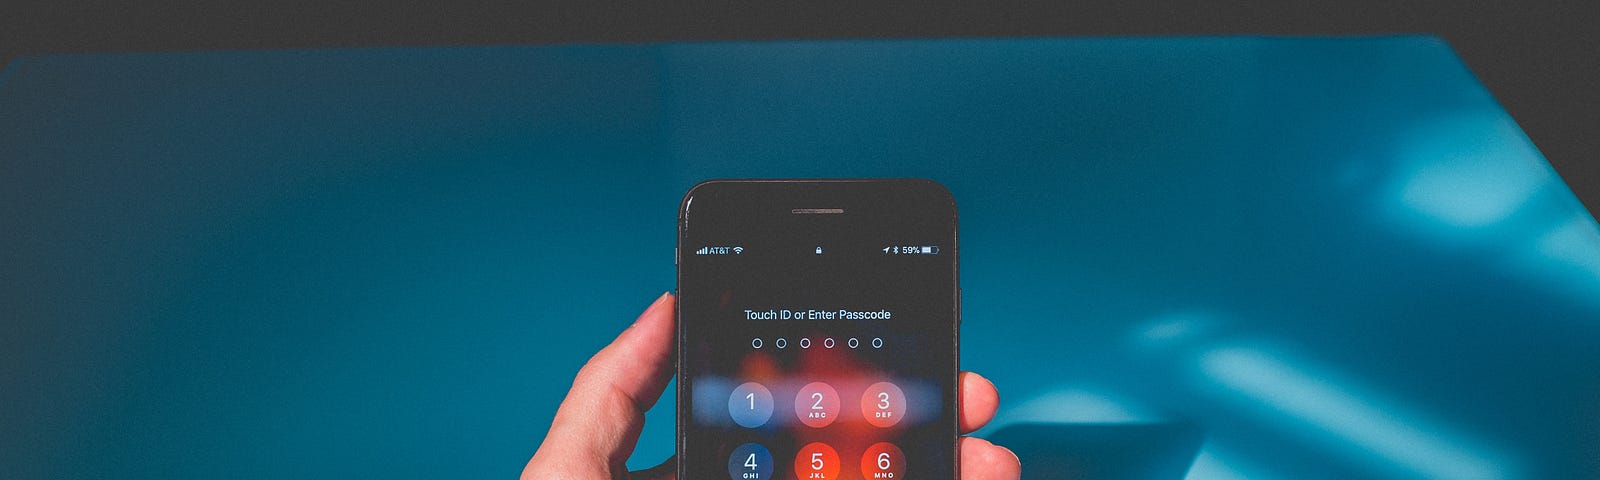 A hand holding a locked phone against a blue background